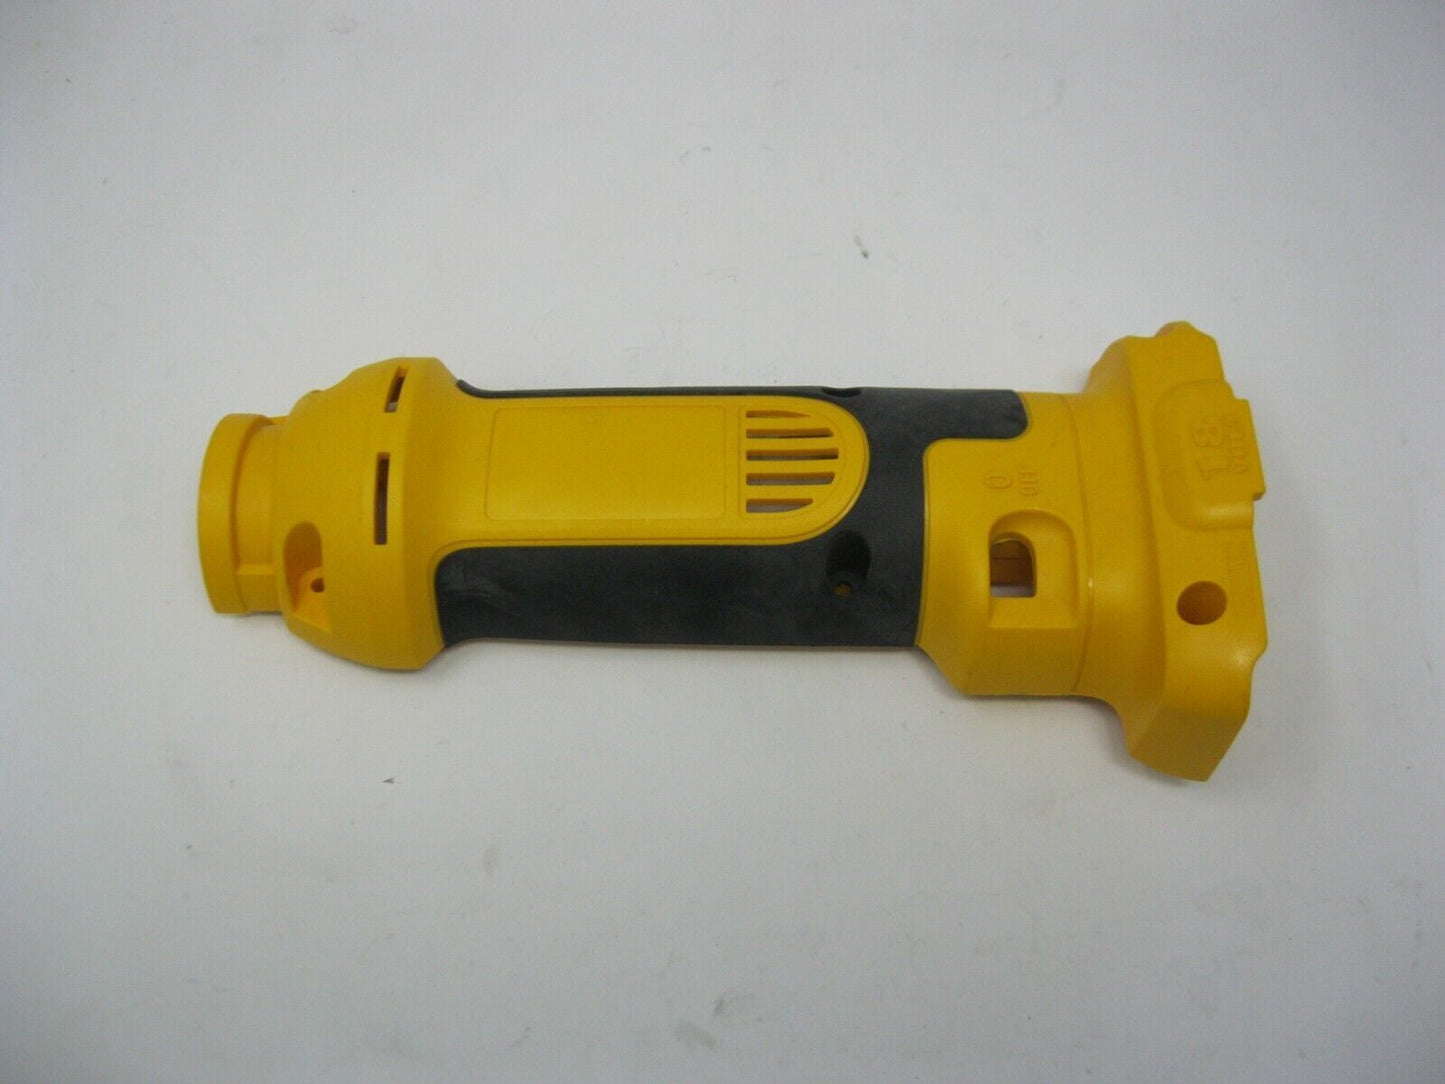 DeWALT Clamshell Replacement Body Left Side Only 654884-00